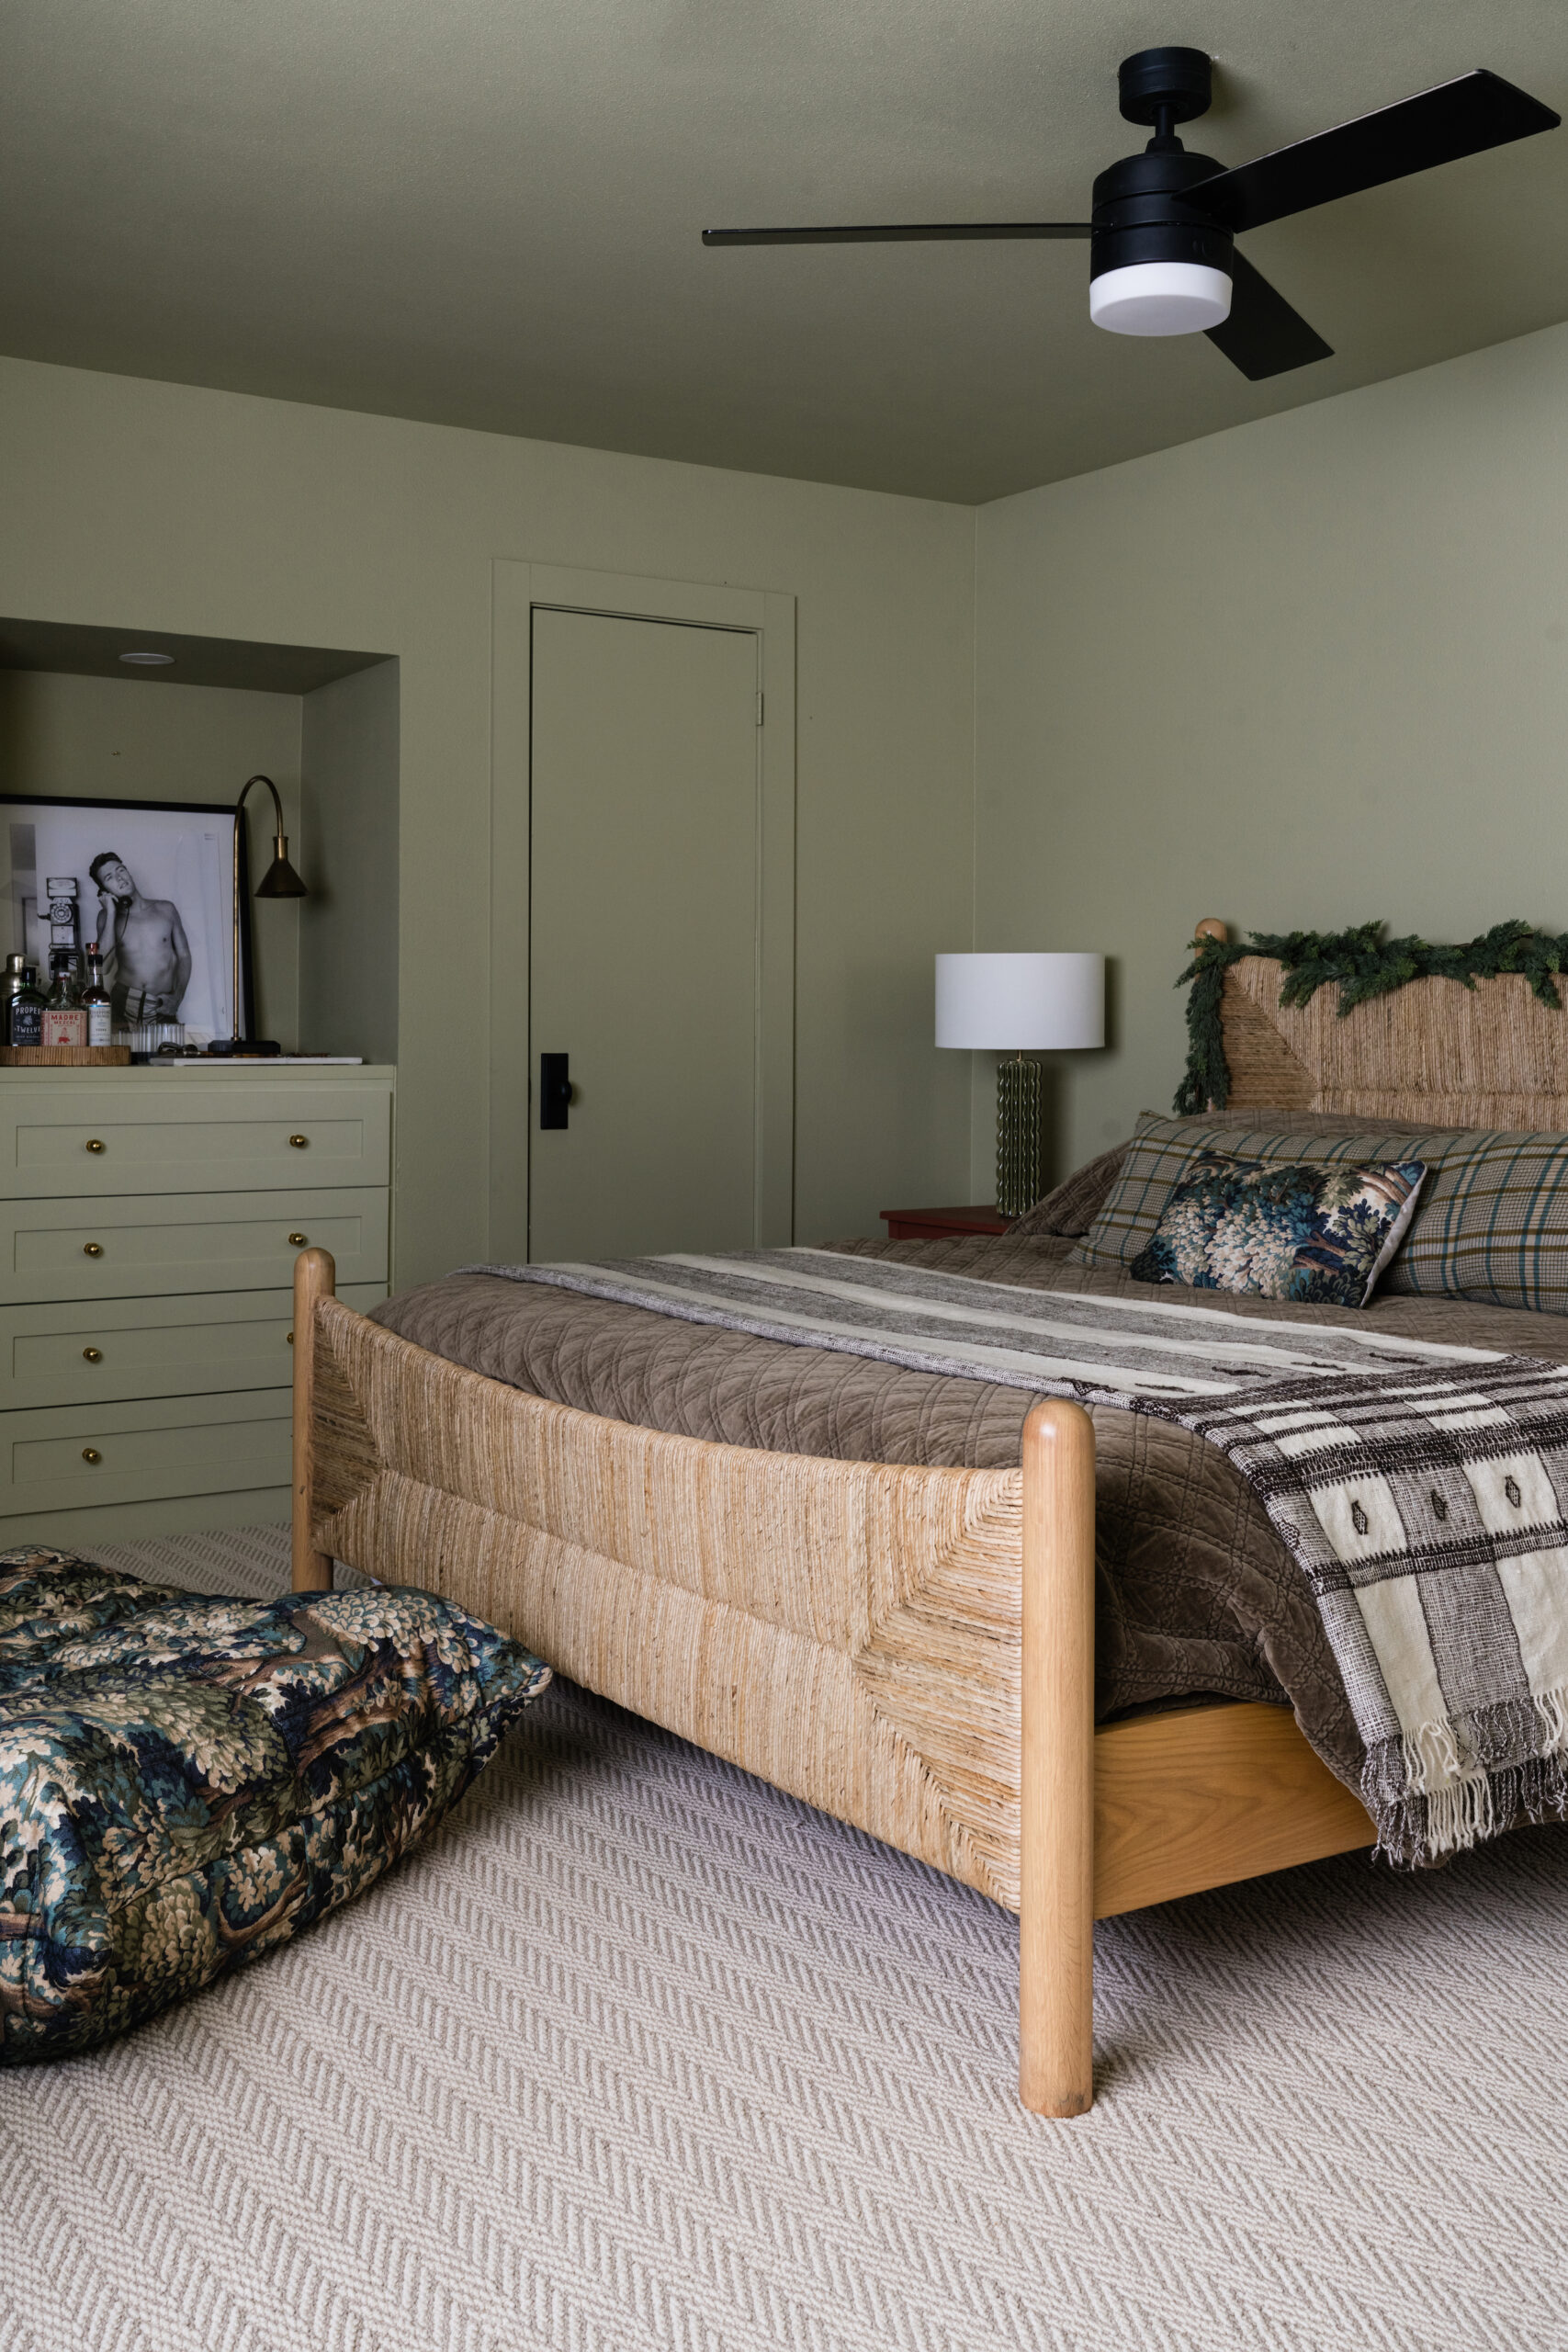 sage green bedroom with natural woven bed and holiday garland